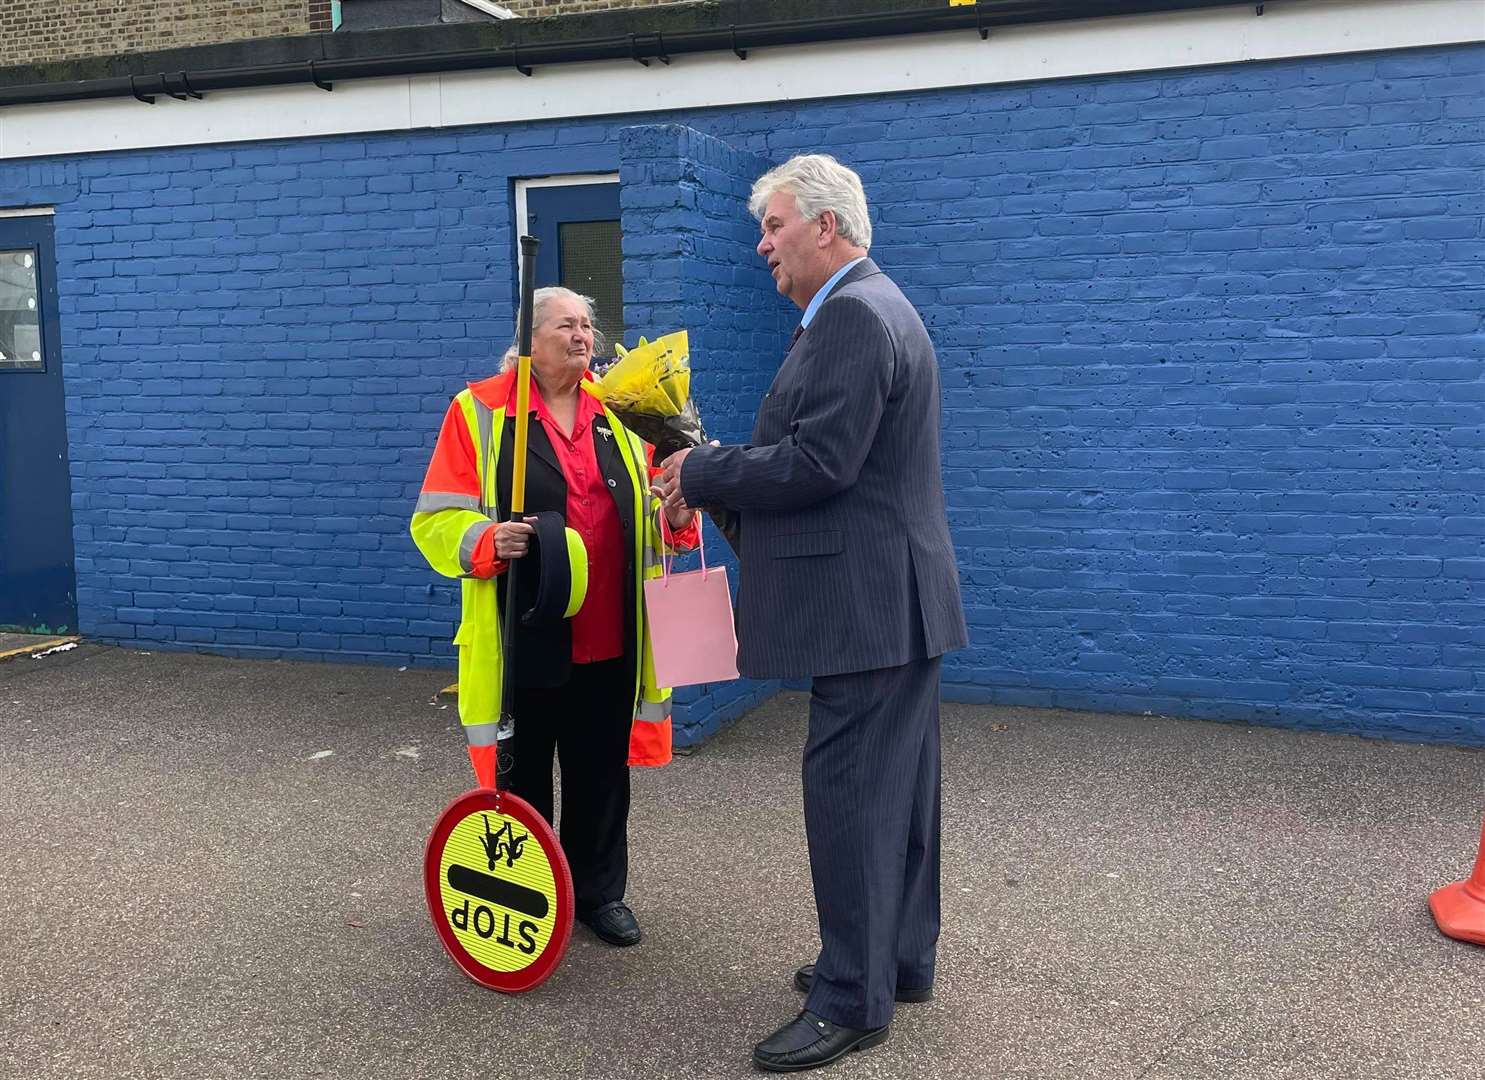 Medway lollipop lady Jenny Lewing has retired after 40 years with 37 at Barnsole Primary School in Gillingham. Cabinet member for frontline services Cllr Phil Filmer presents Jenny with a retirement gift and thanks her for her service. Picture: Medway Council